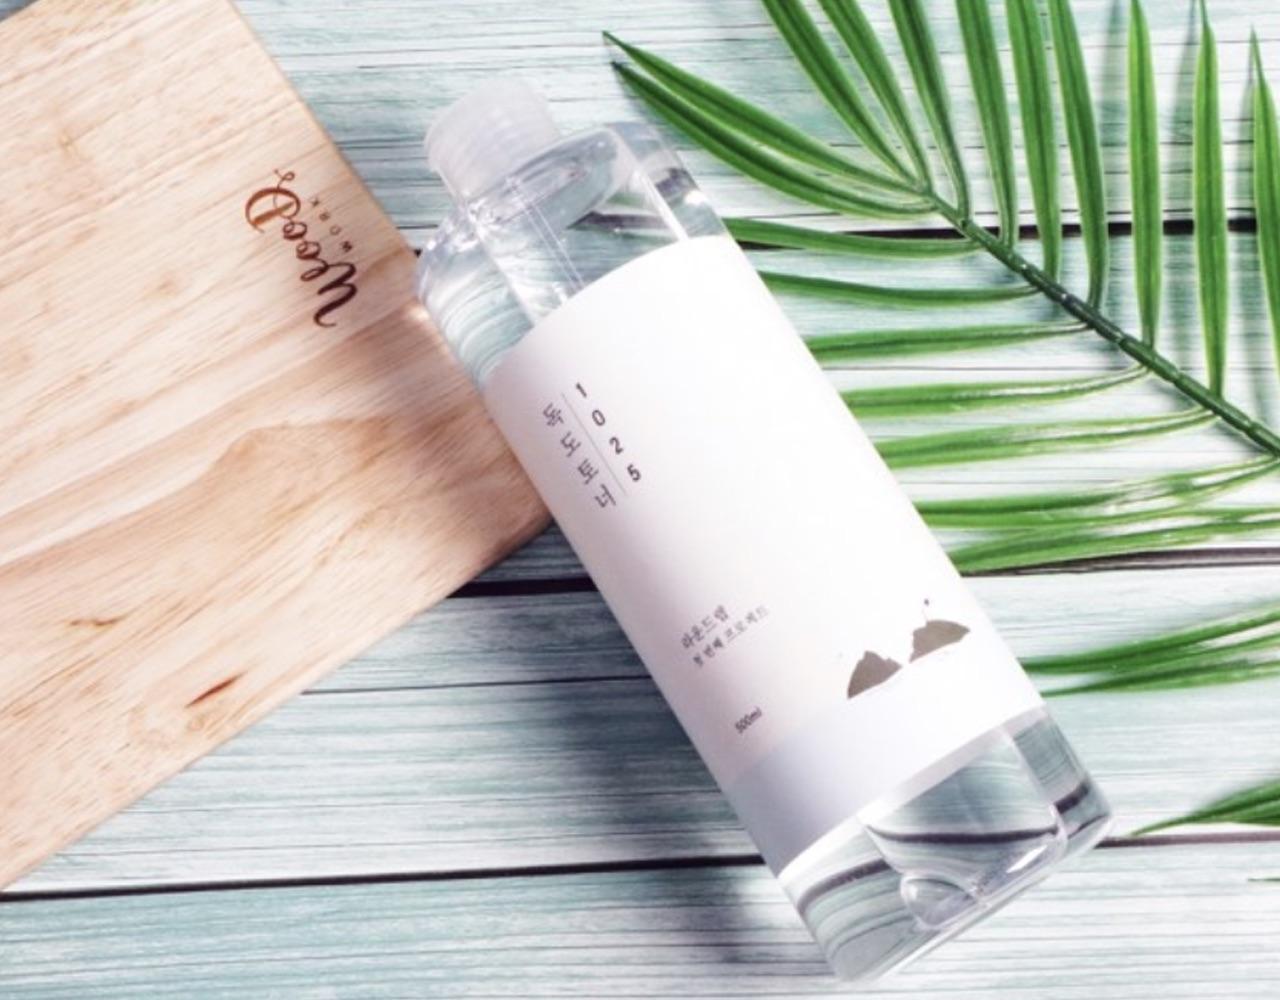 Korean brand round lab's dokdo toner bottle with wooden background and plant 